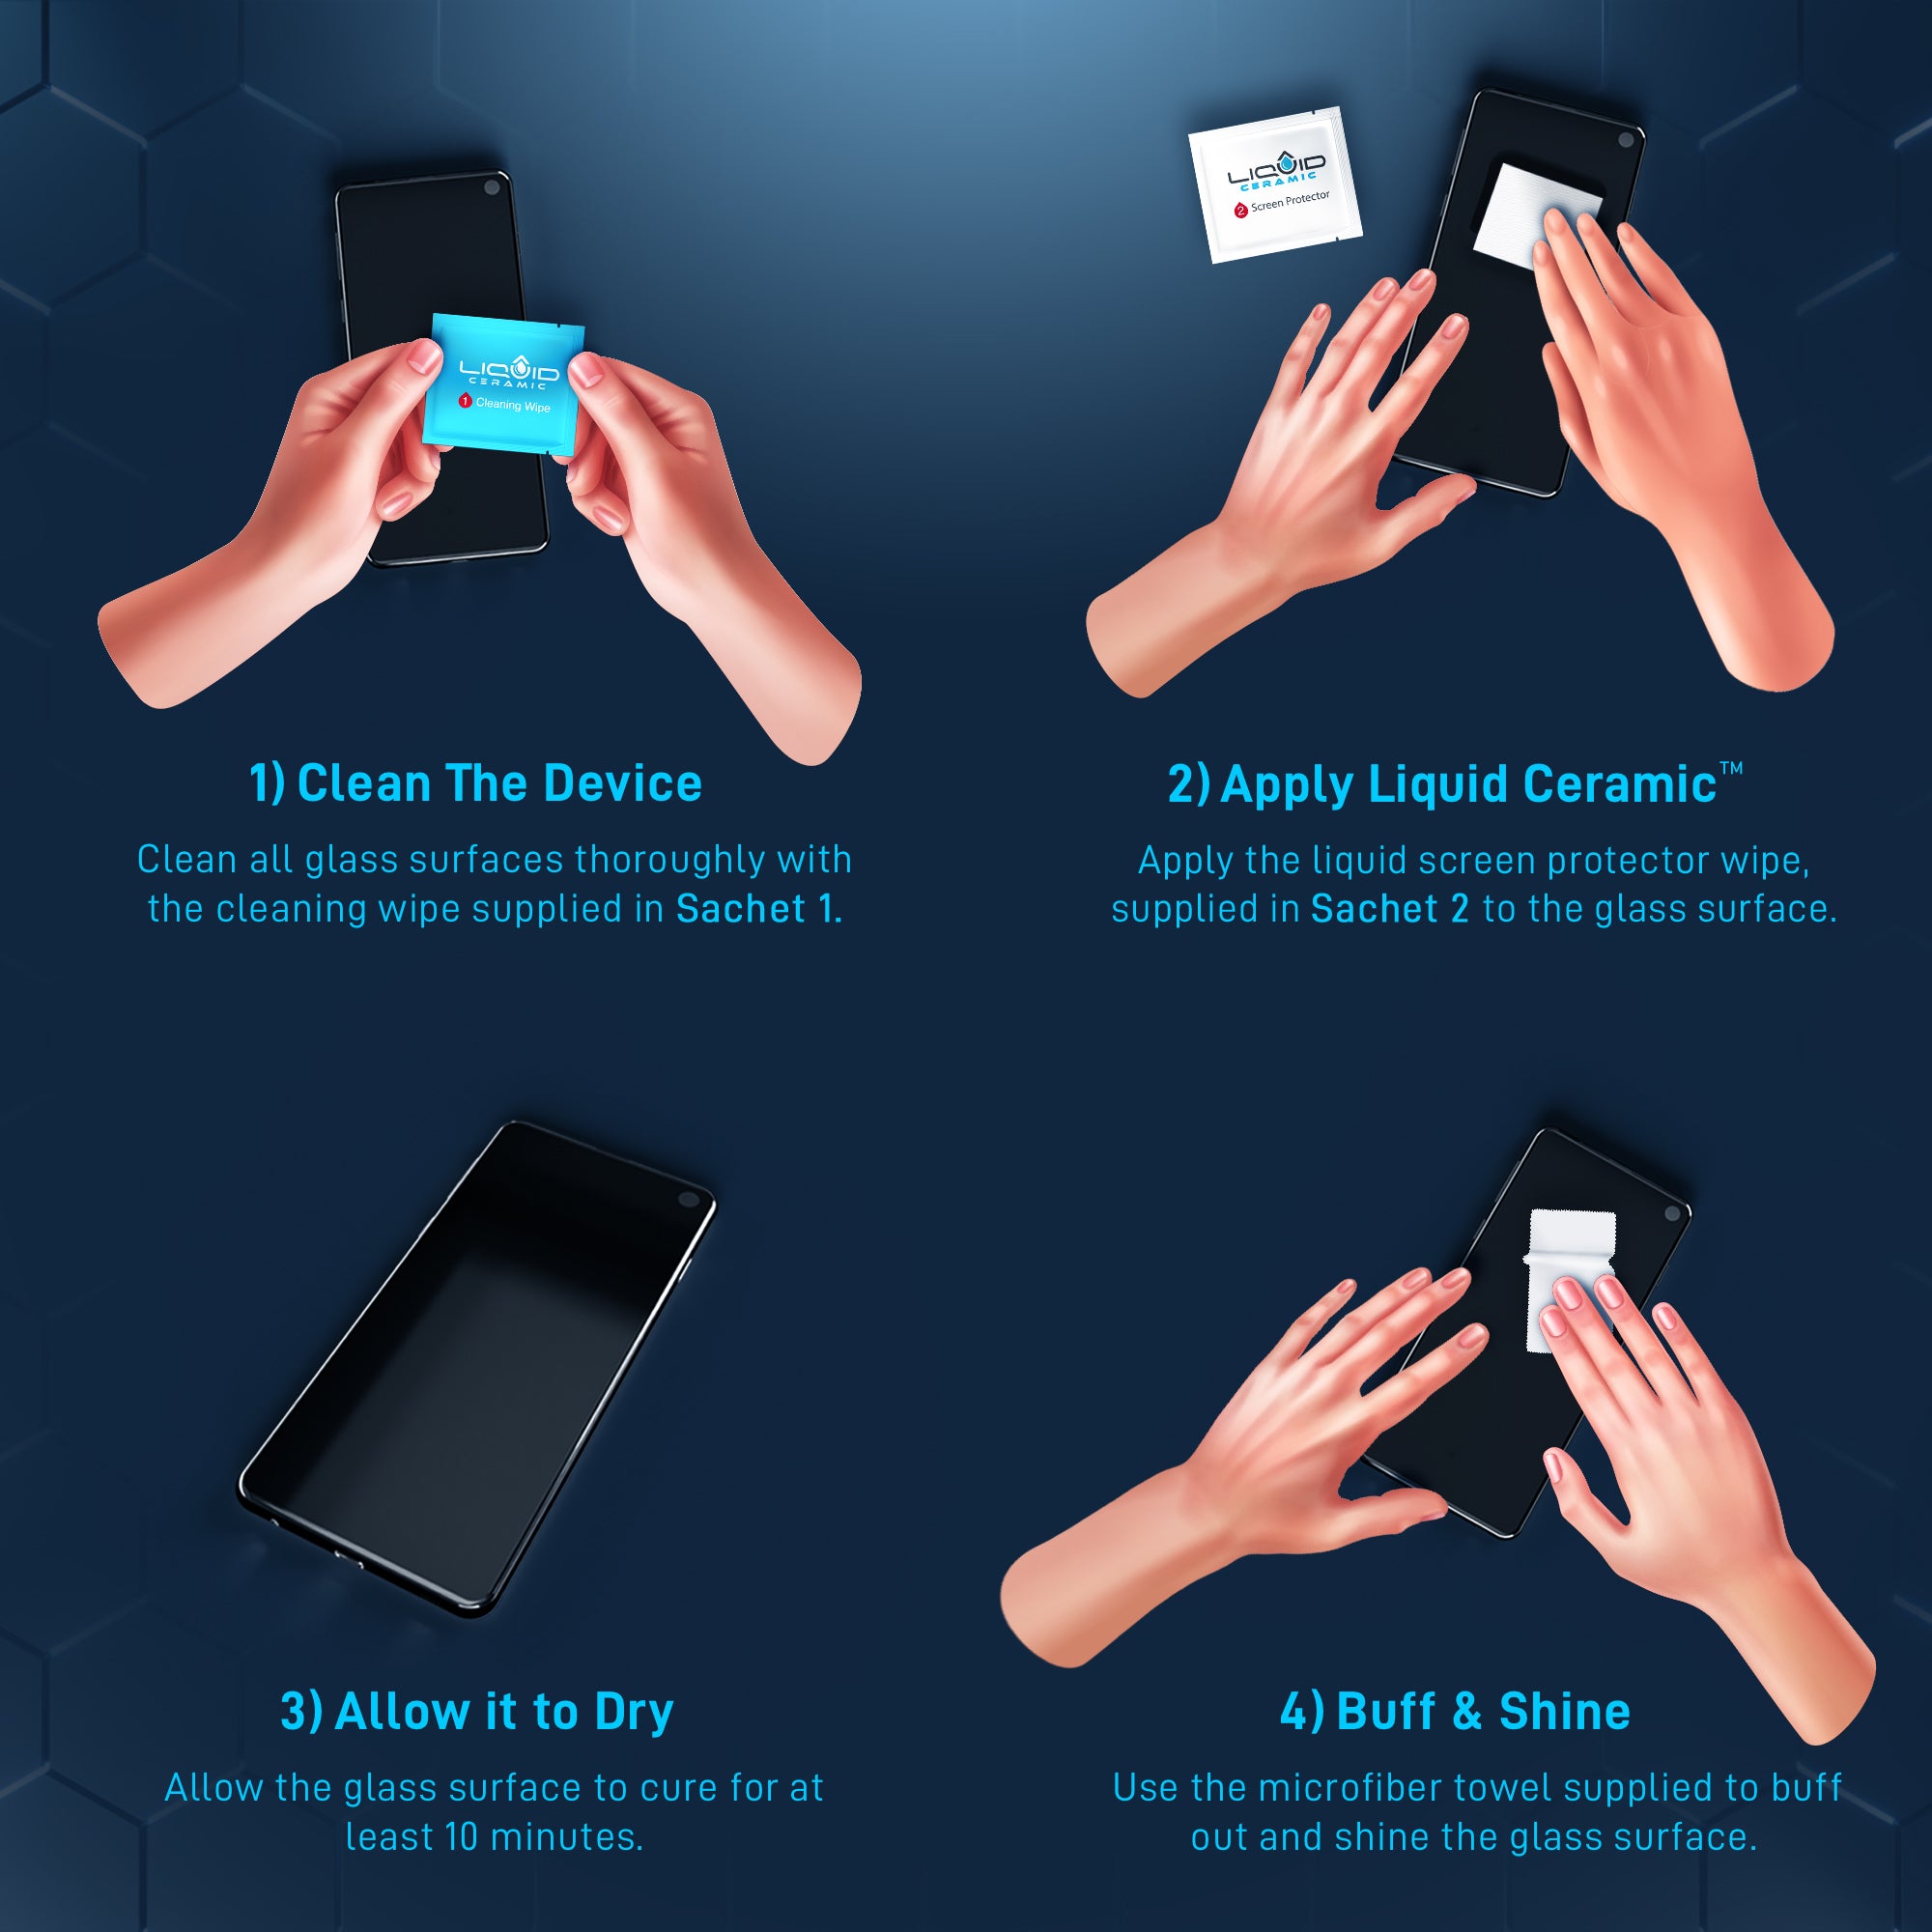 Liquid Ceramic Screen Protector with $400 Guarantee for All Phones Tablets and Smart Watches